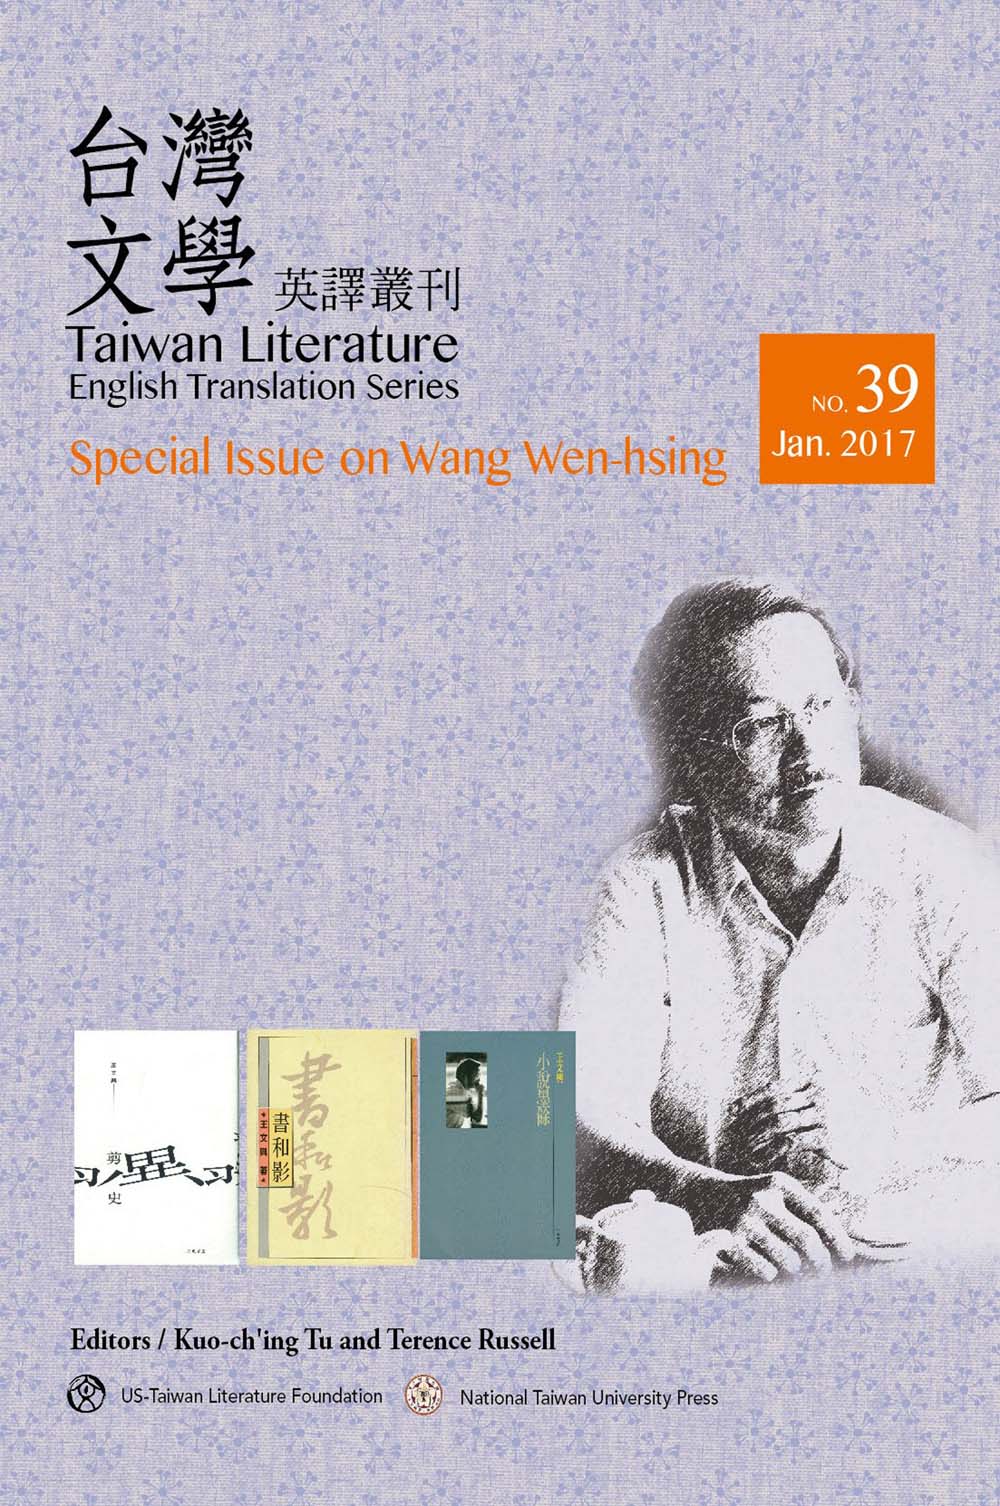 Taiwan Literature: English Translation Series, No. 39(Special Issue on Wang Wen-hsing)